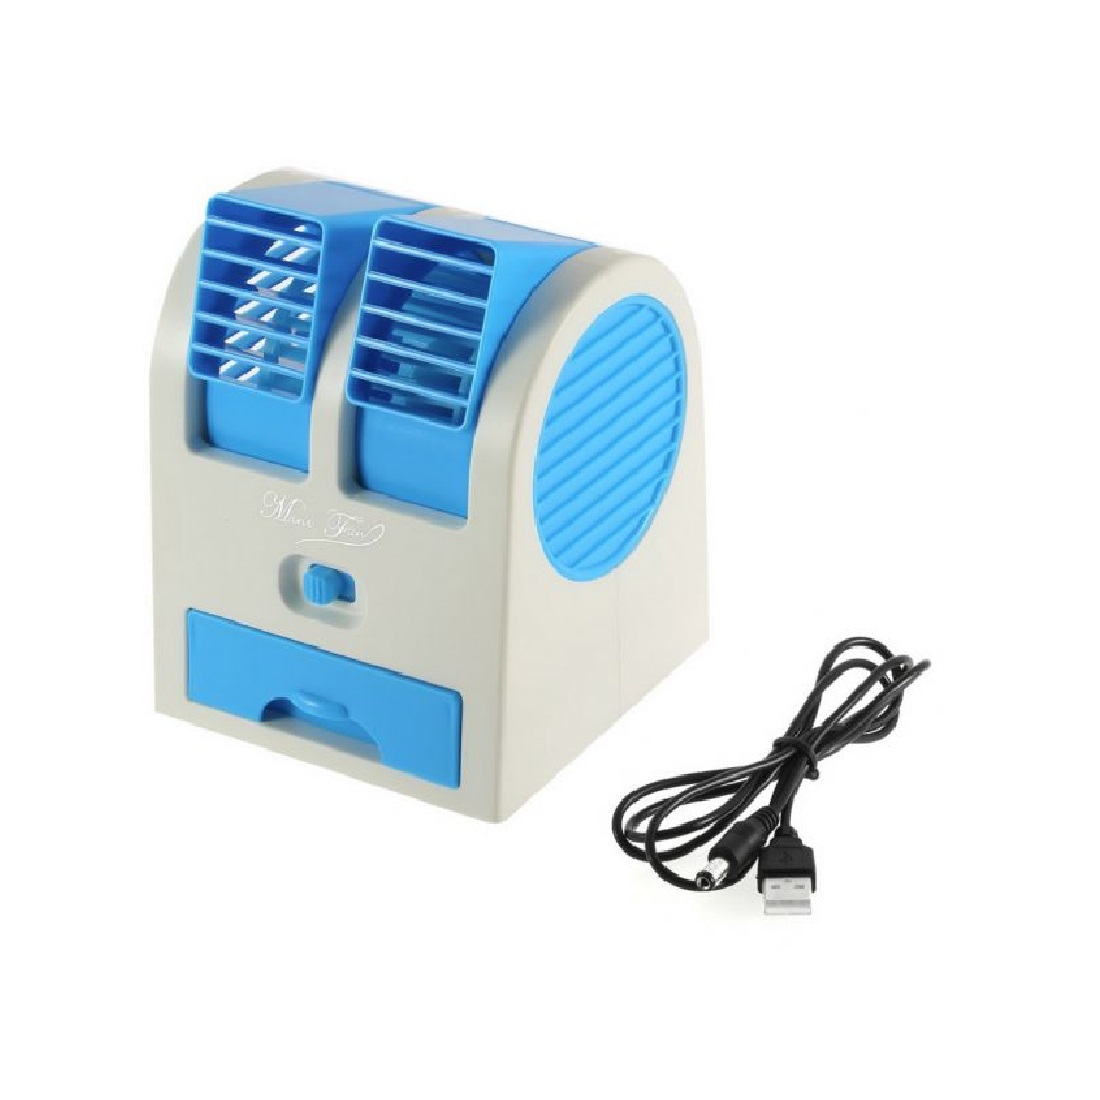 GHK M1 Air Cooler Fan Mini Portable Compact USB Operated Adjustable & Dual Air Wing Multipurpose for Desk, Office, Kitchen & Car (Color Will be dispatched as per Availability)